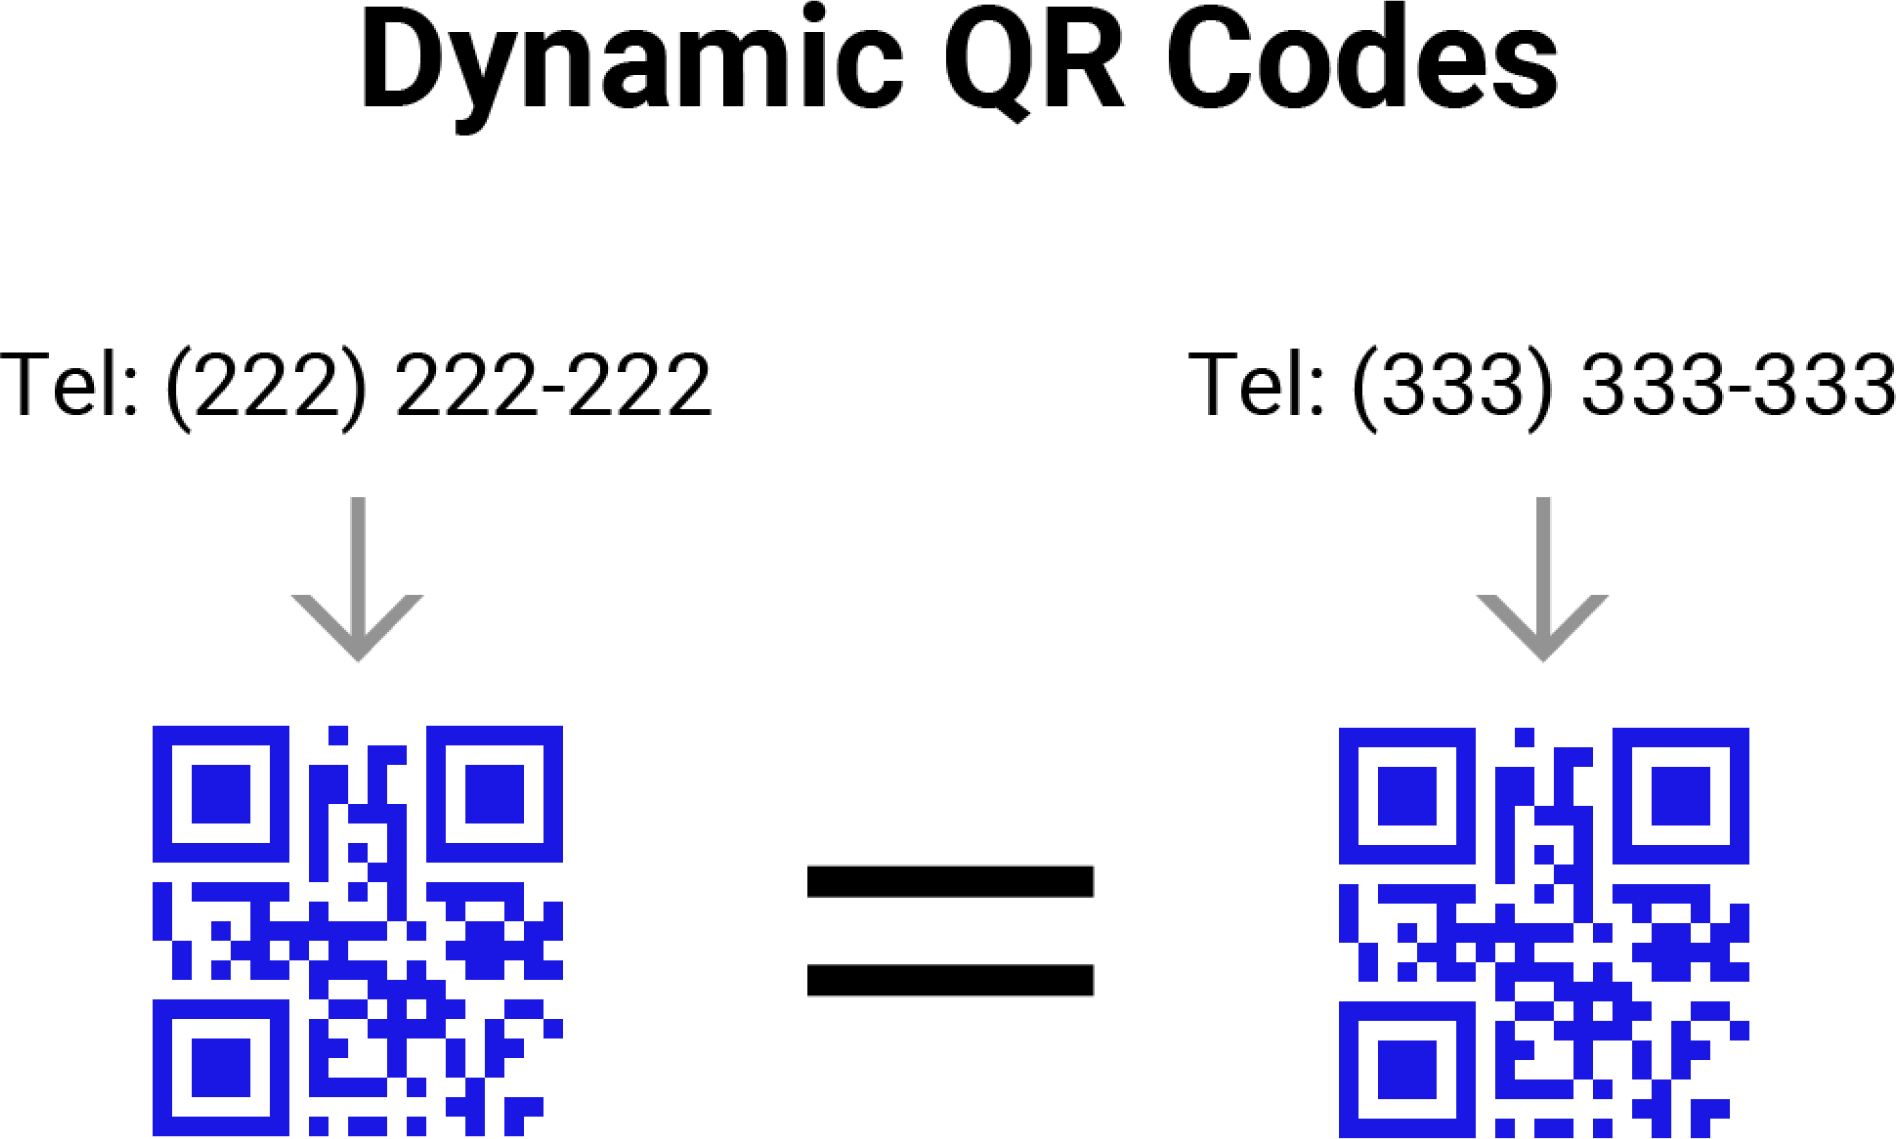 An infographic showing how dynamic QR codes work.